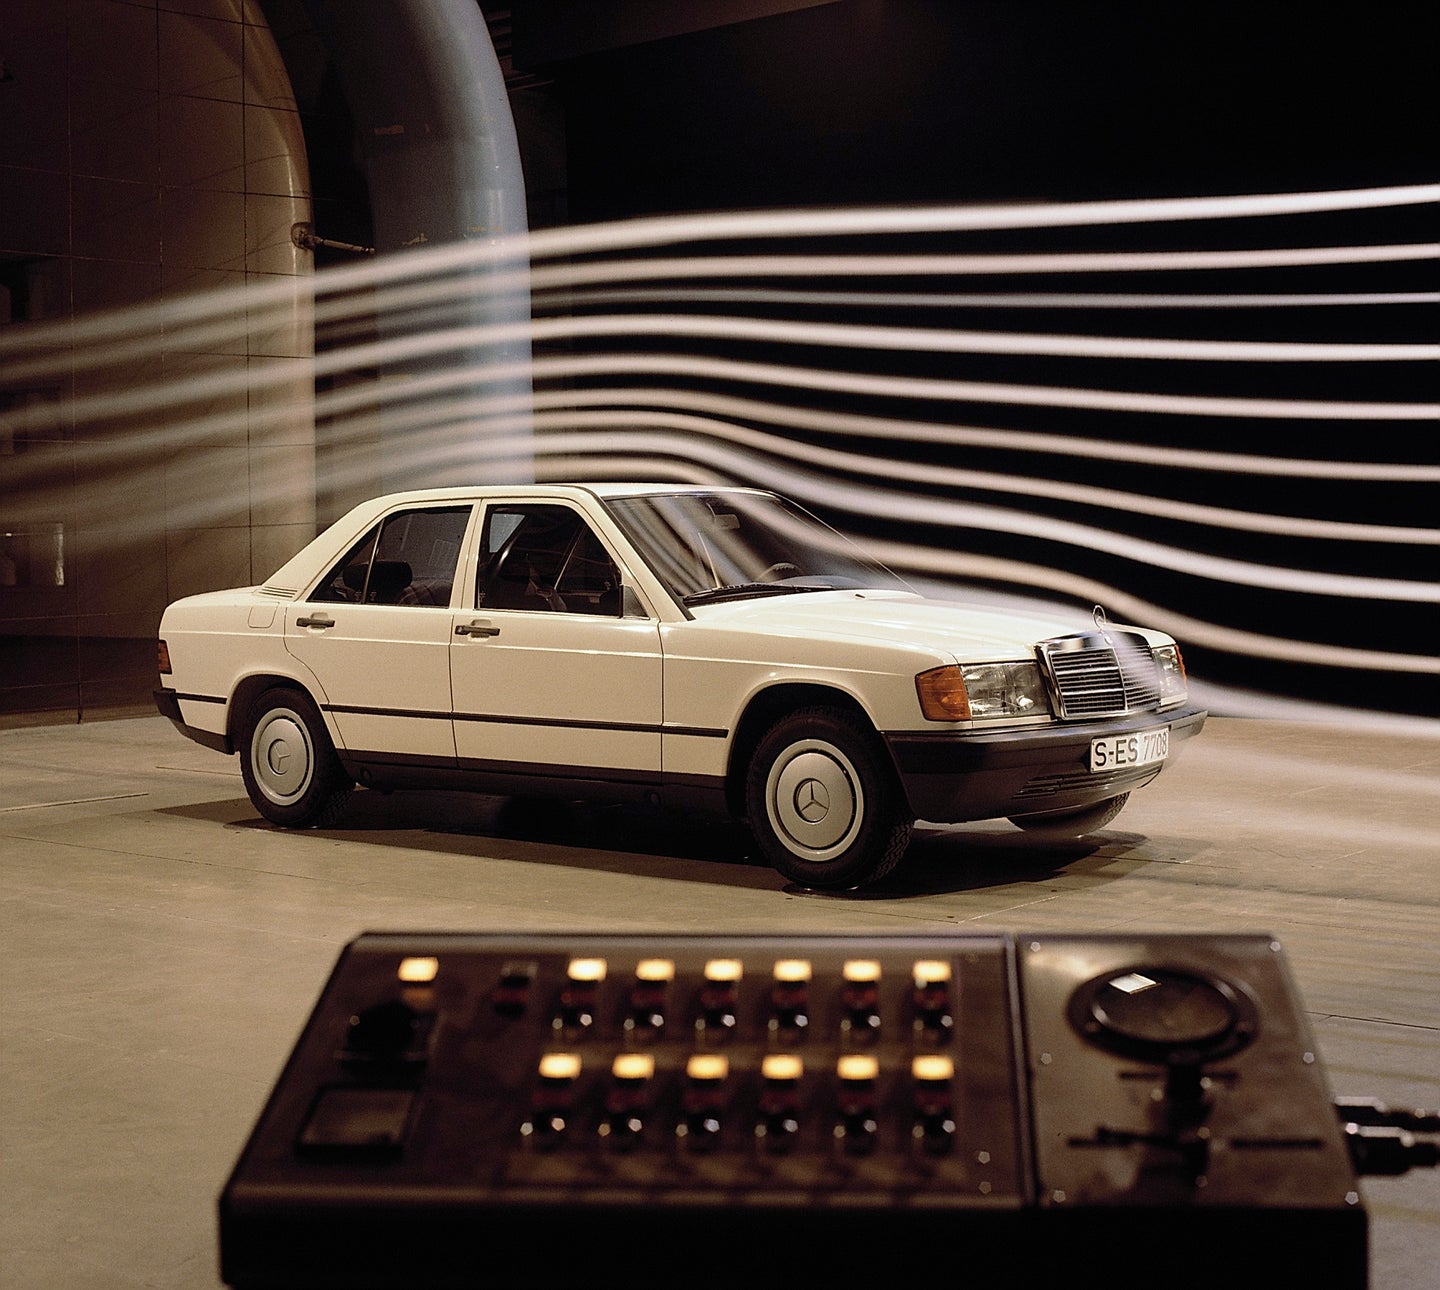 The 35th Anniversary of the Mercedes C-Class